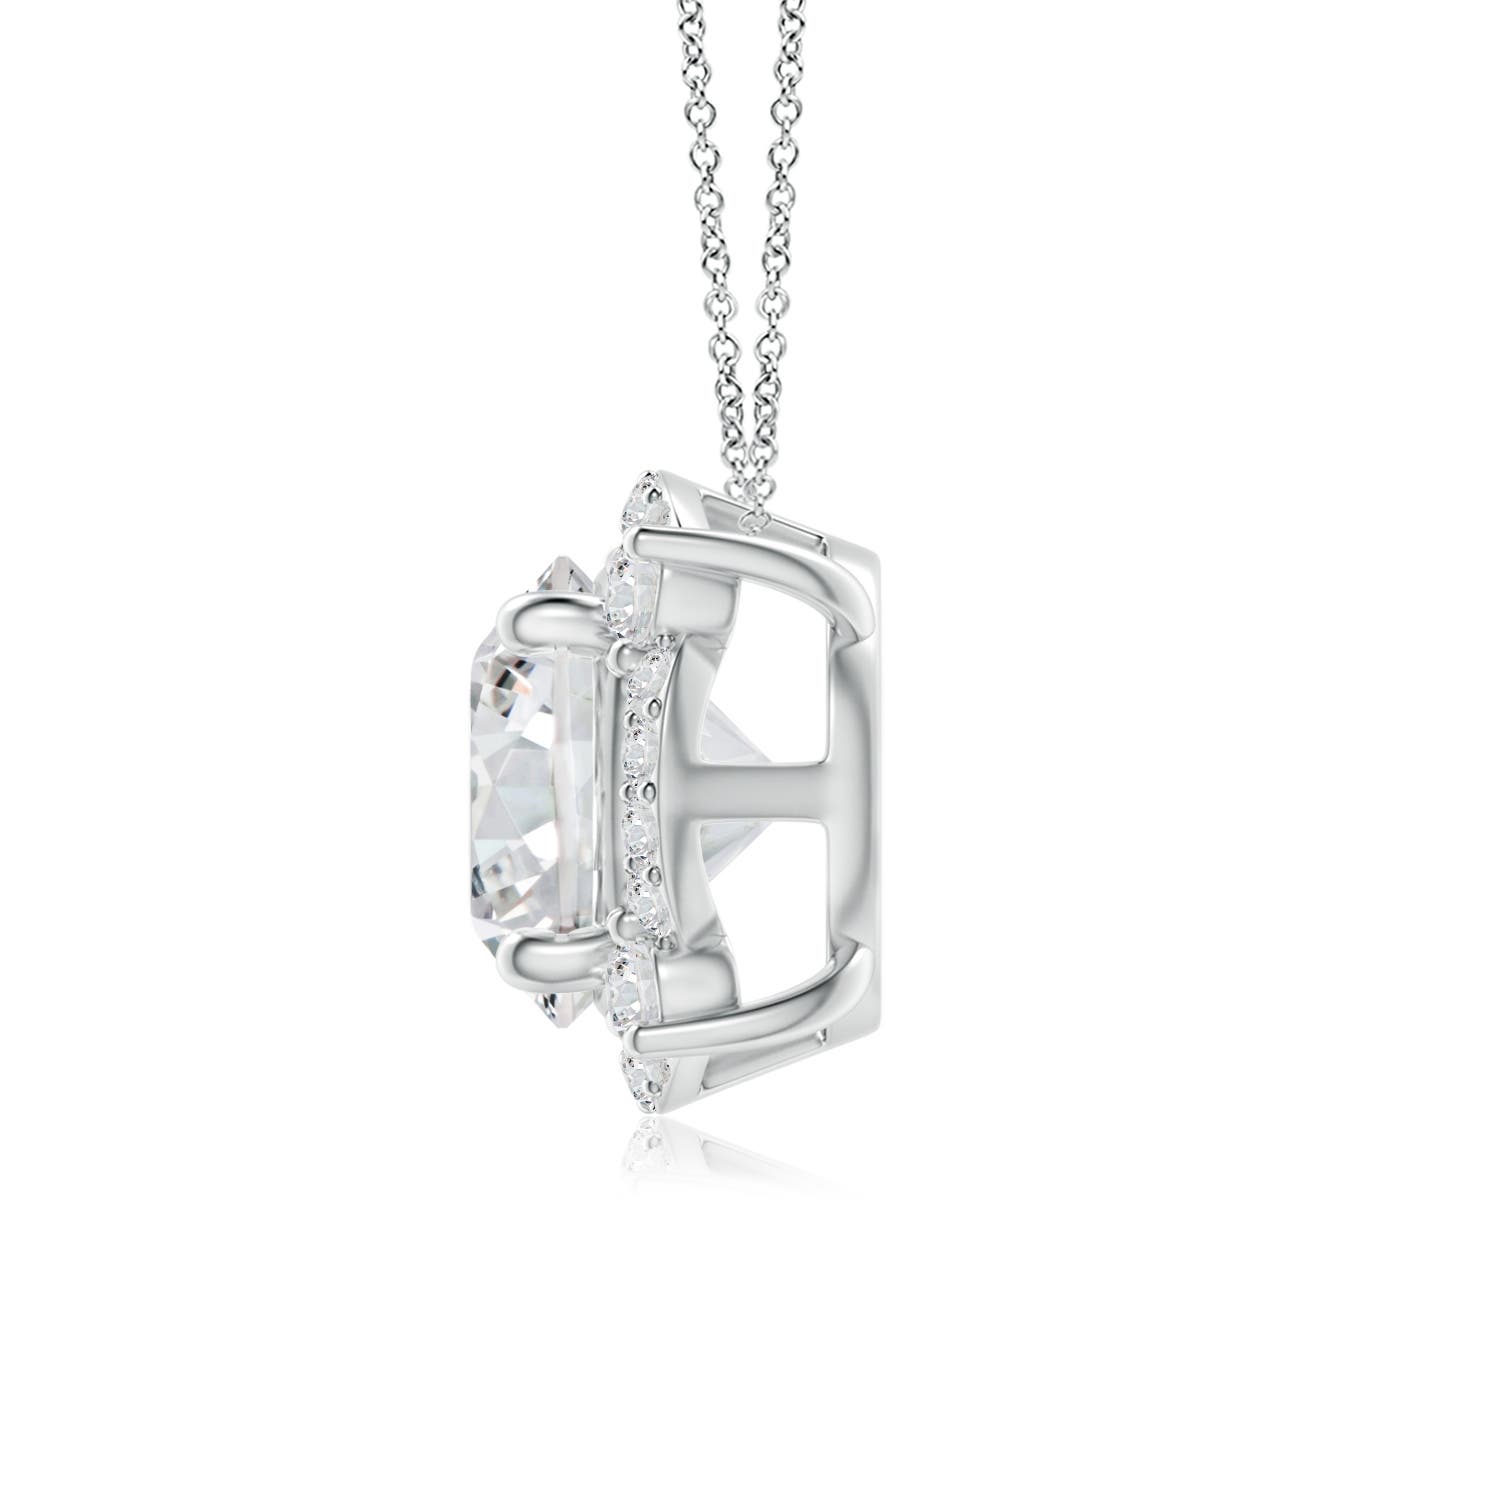 H, SI2 / 1.18 CT / 14 KT White Gold